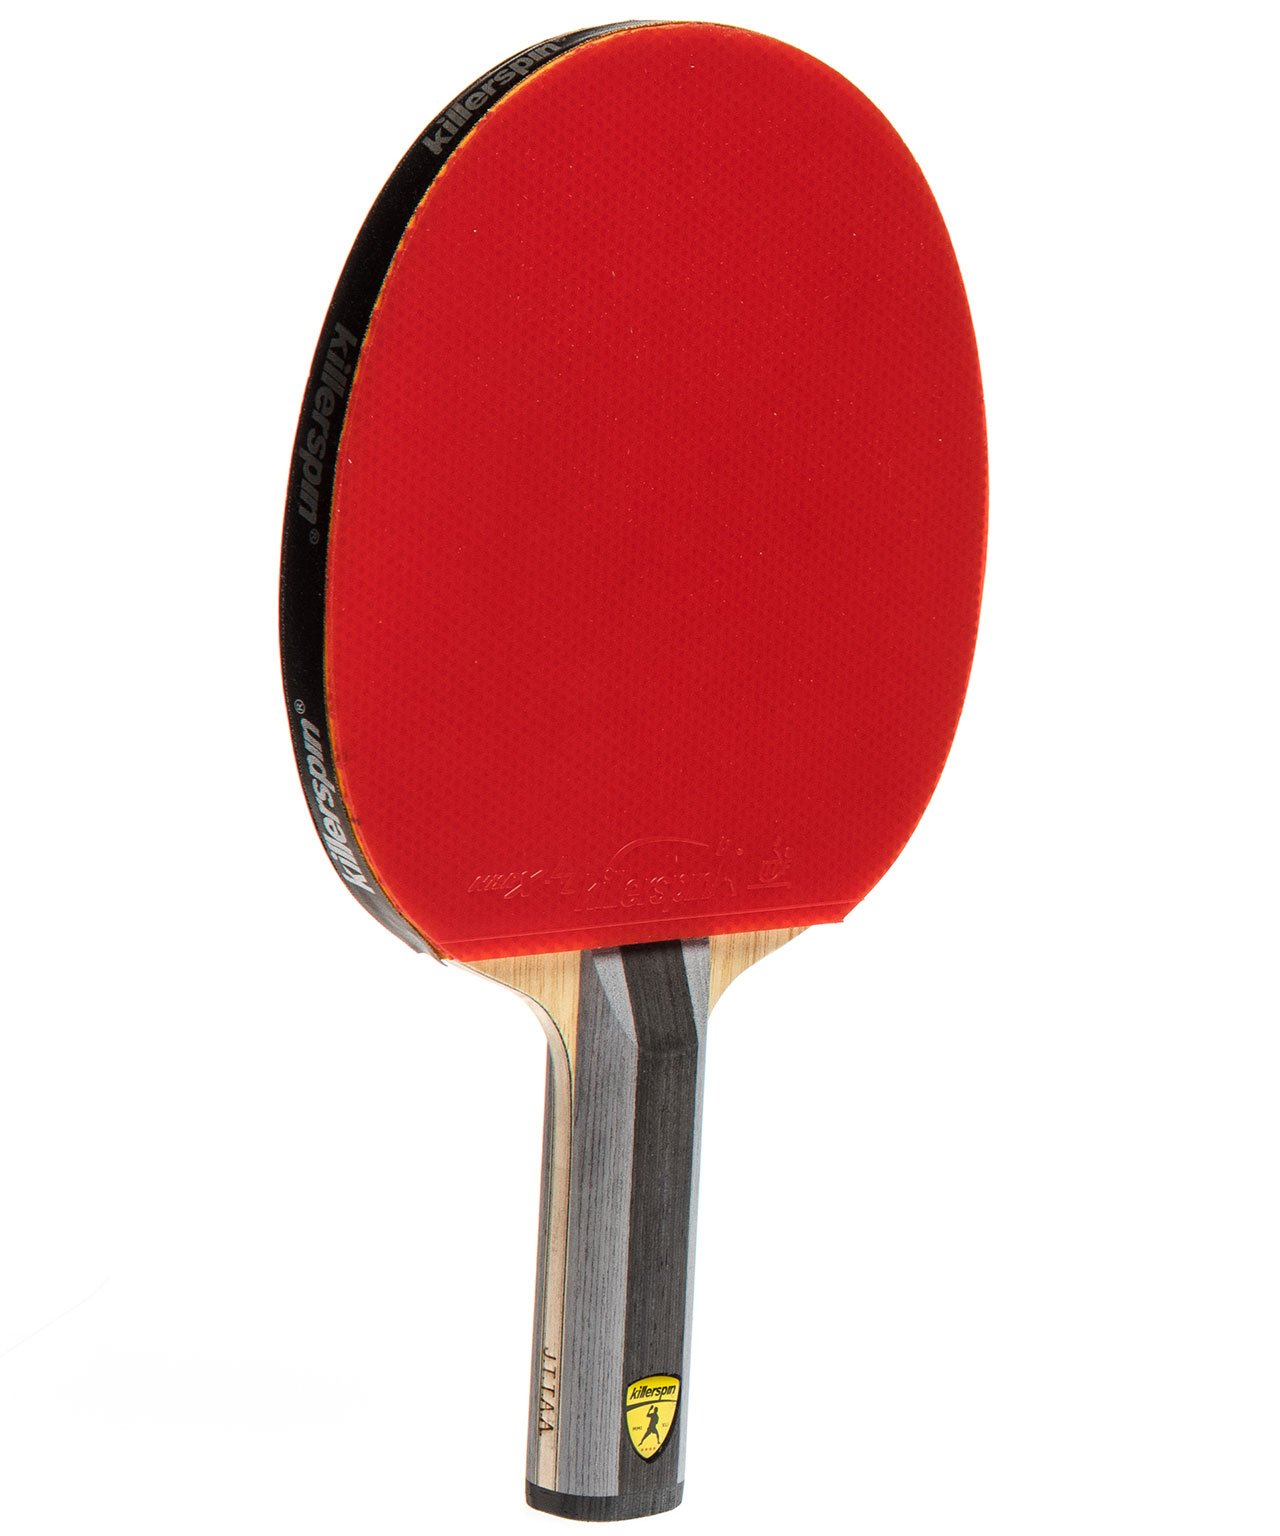 Browse Free HD Images of Hand Holding Red Ping Pong Paddle On Grey